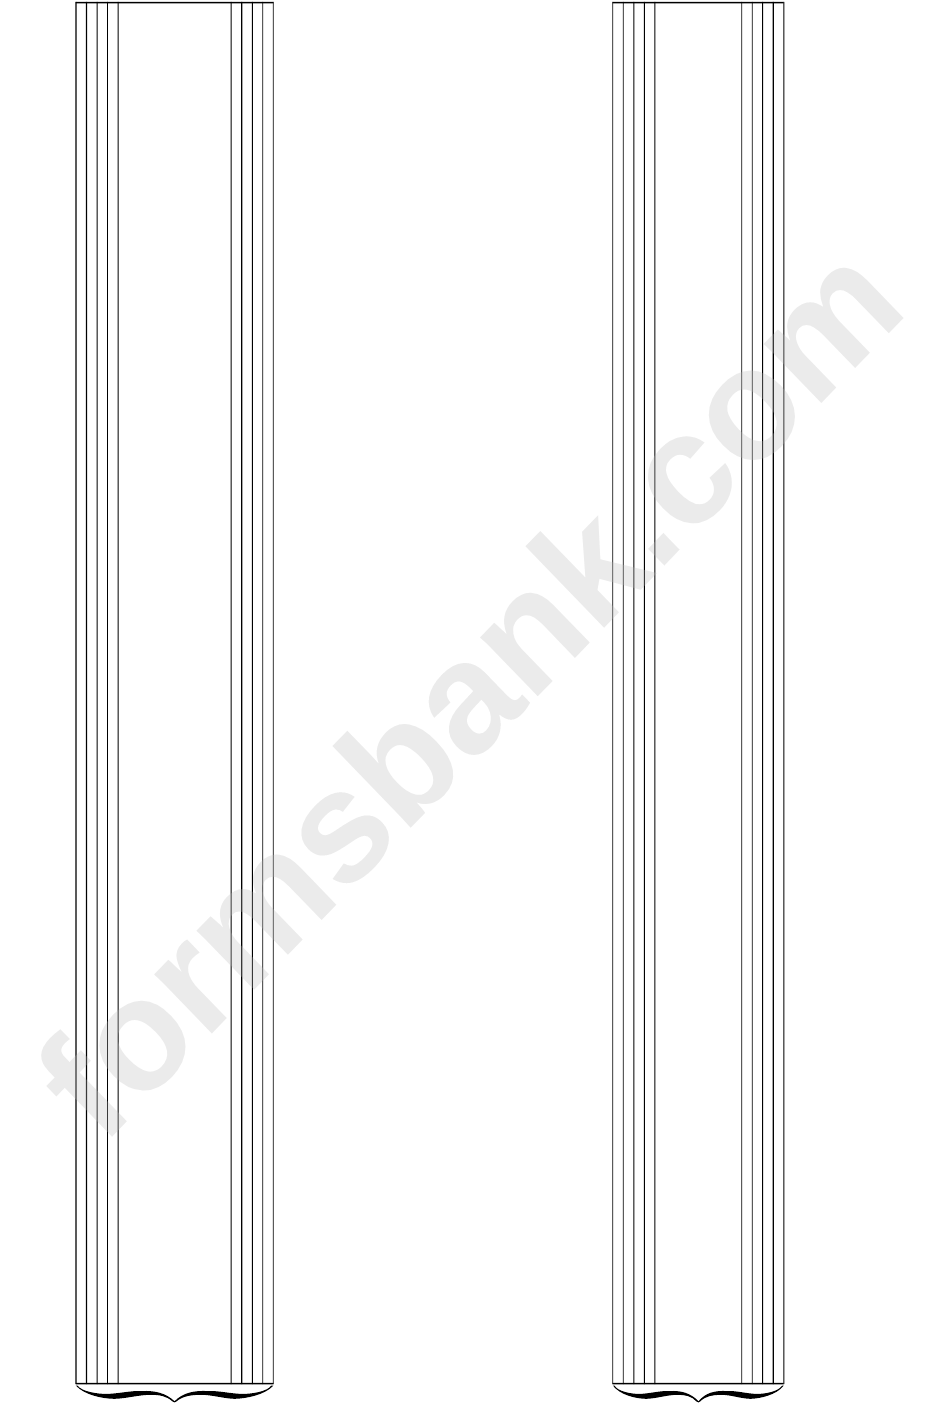 2-Stave Keyboard No Clef With Surrounding Space For Schenker Analysis (A4 Landscape) Blank Sheet Music